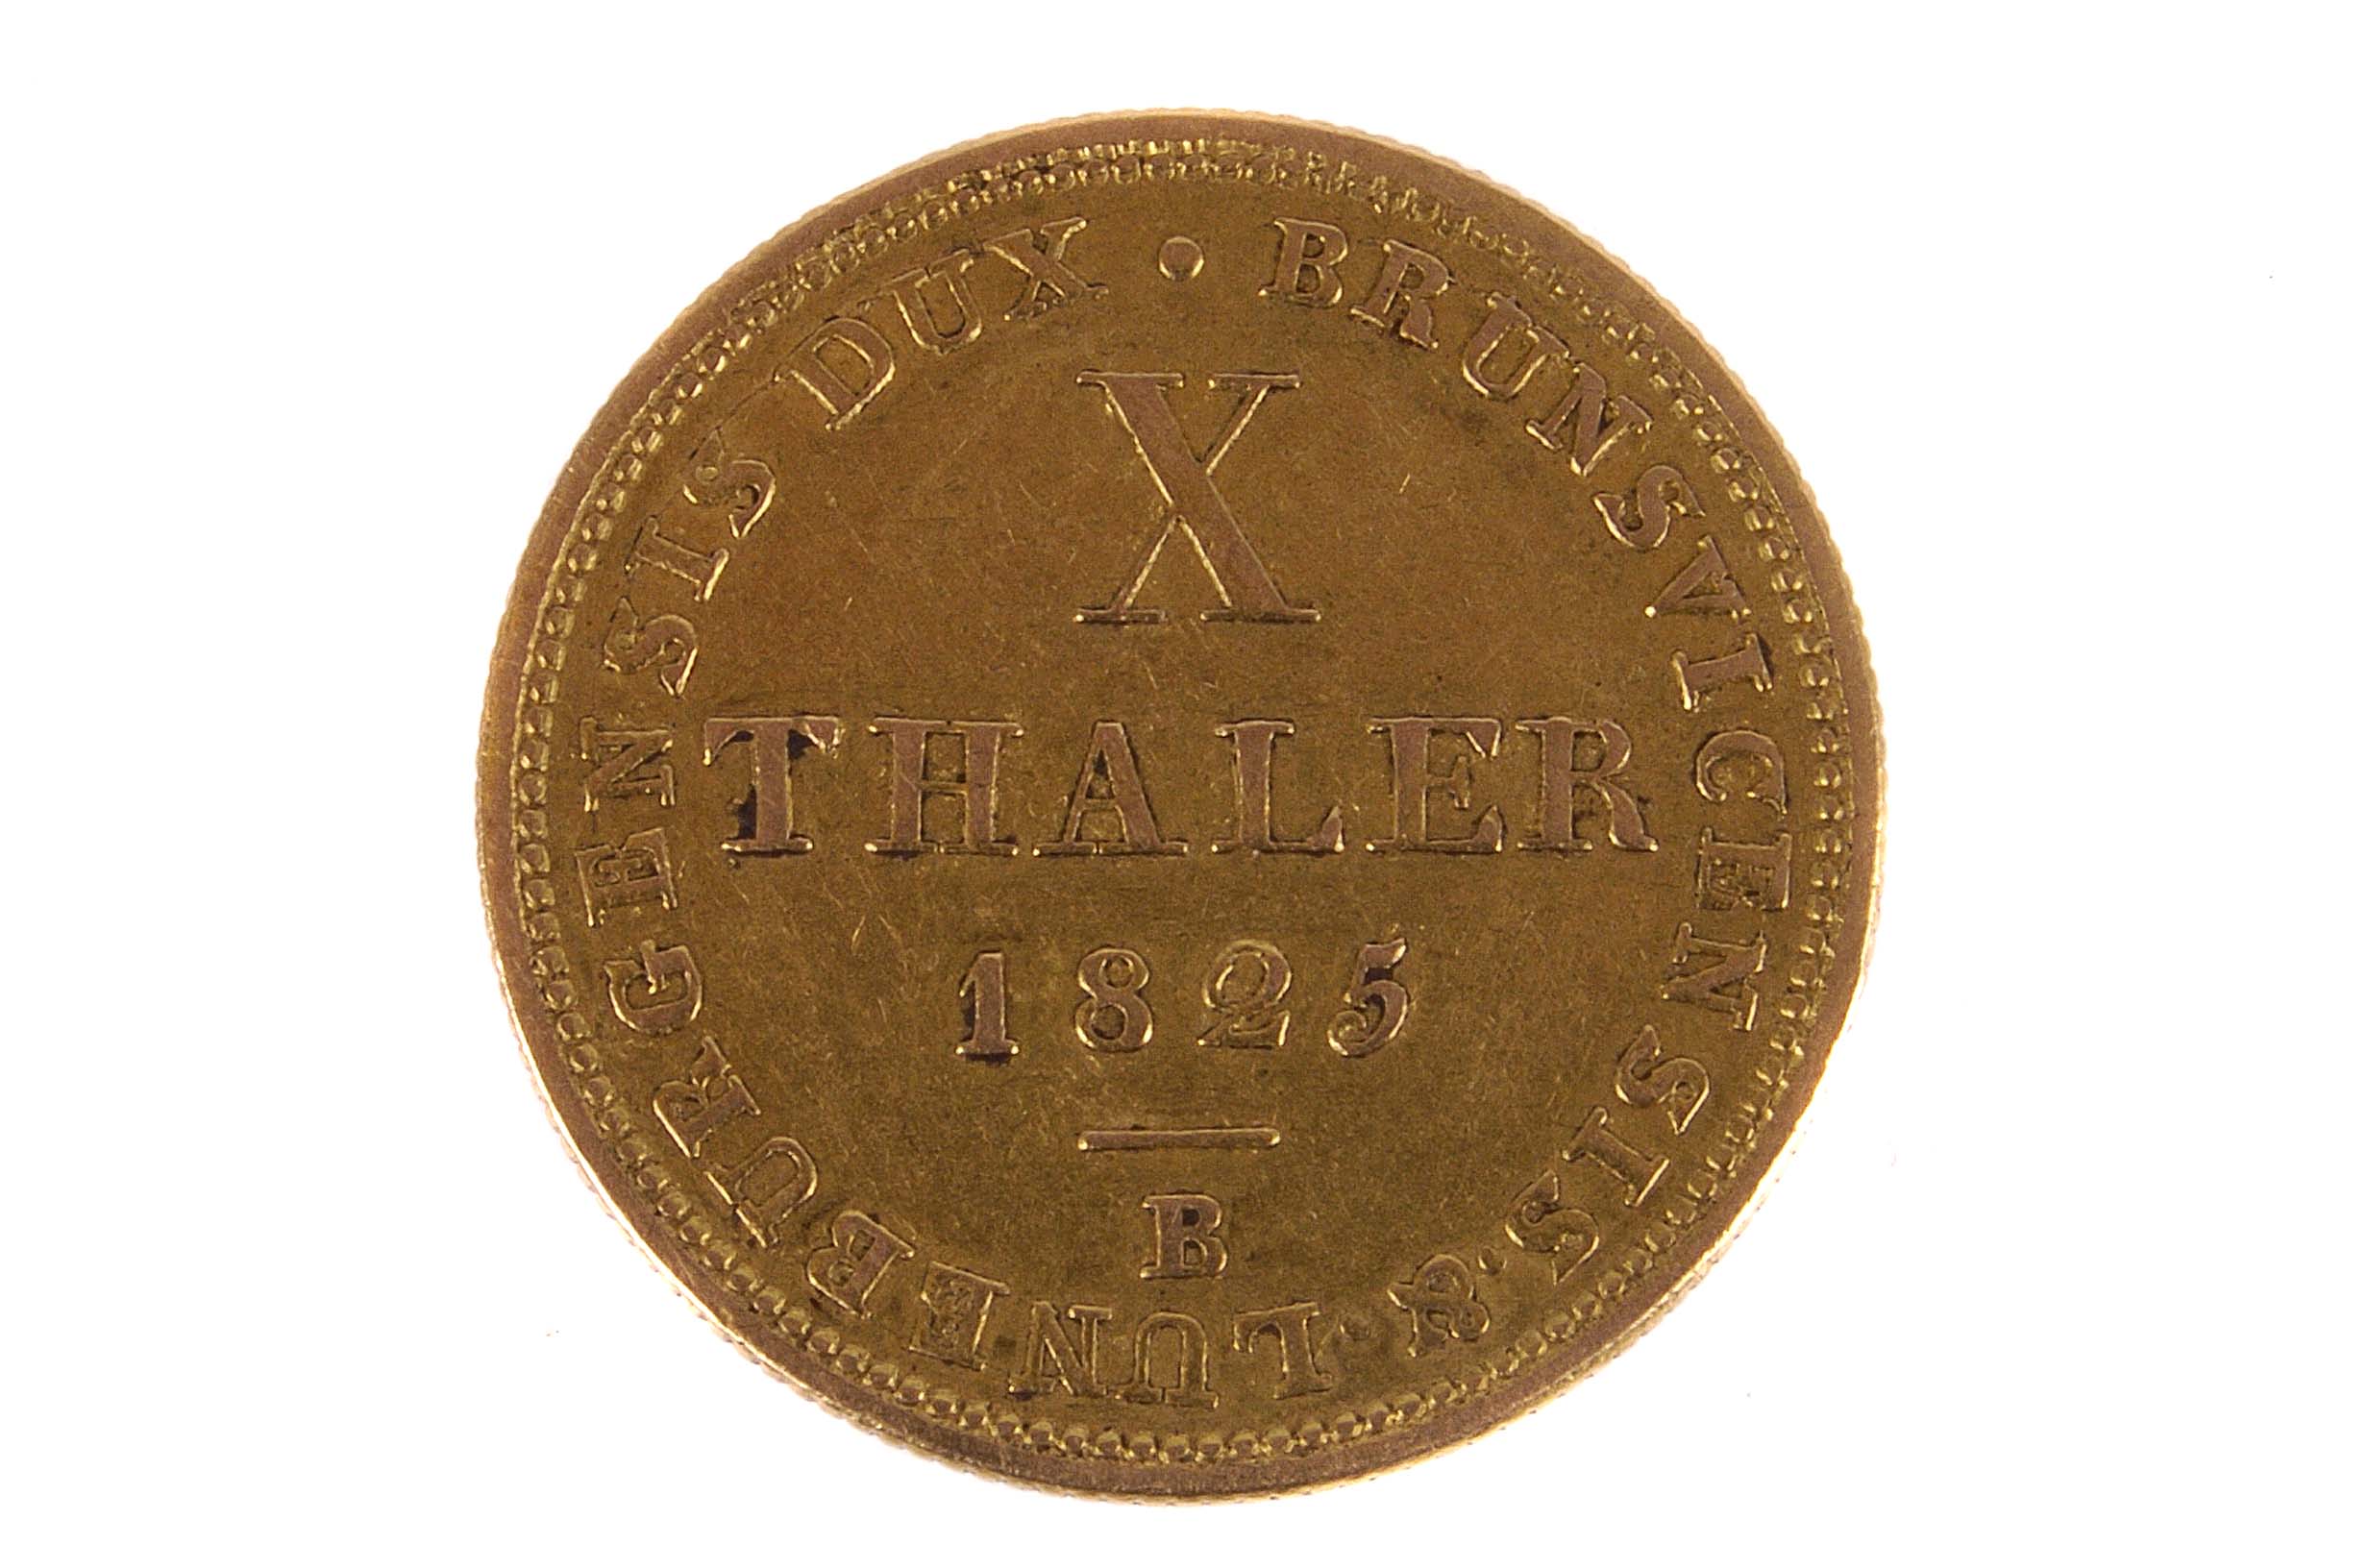 A George IV gold ten thaler coin, dated 1825 marked to obverse with Brunsvicensis & Luneburgensis